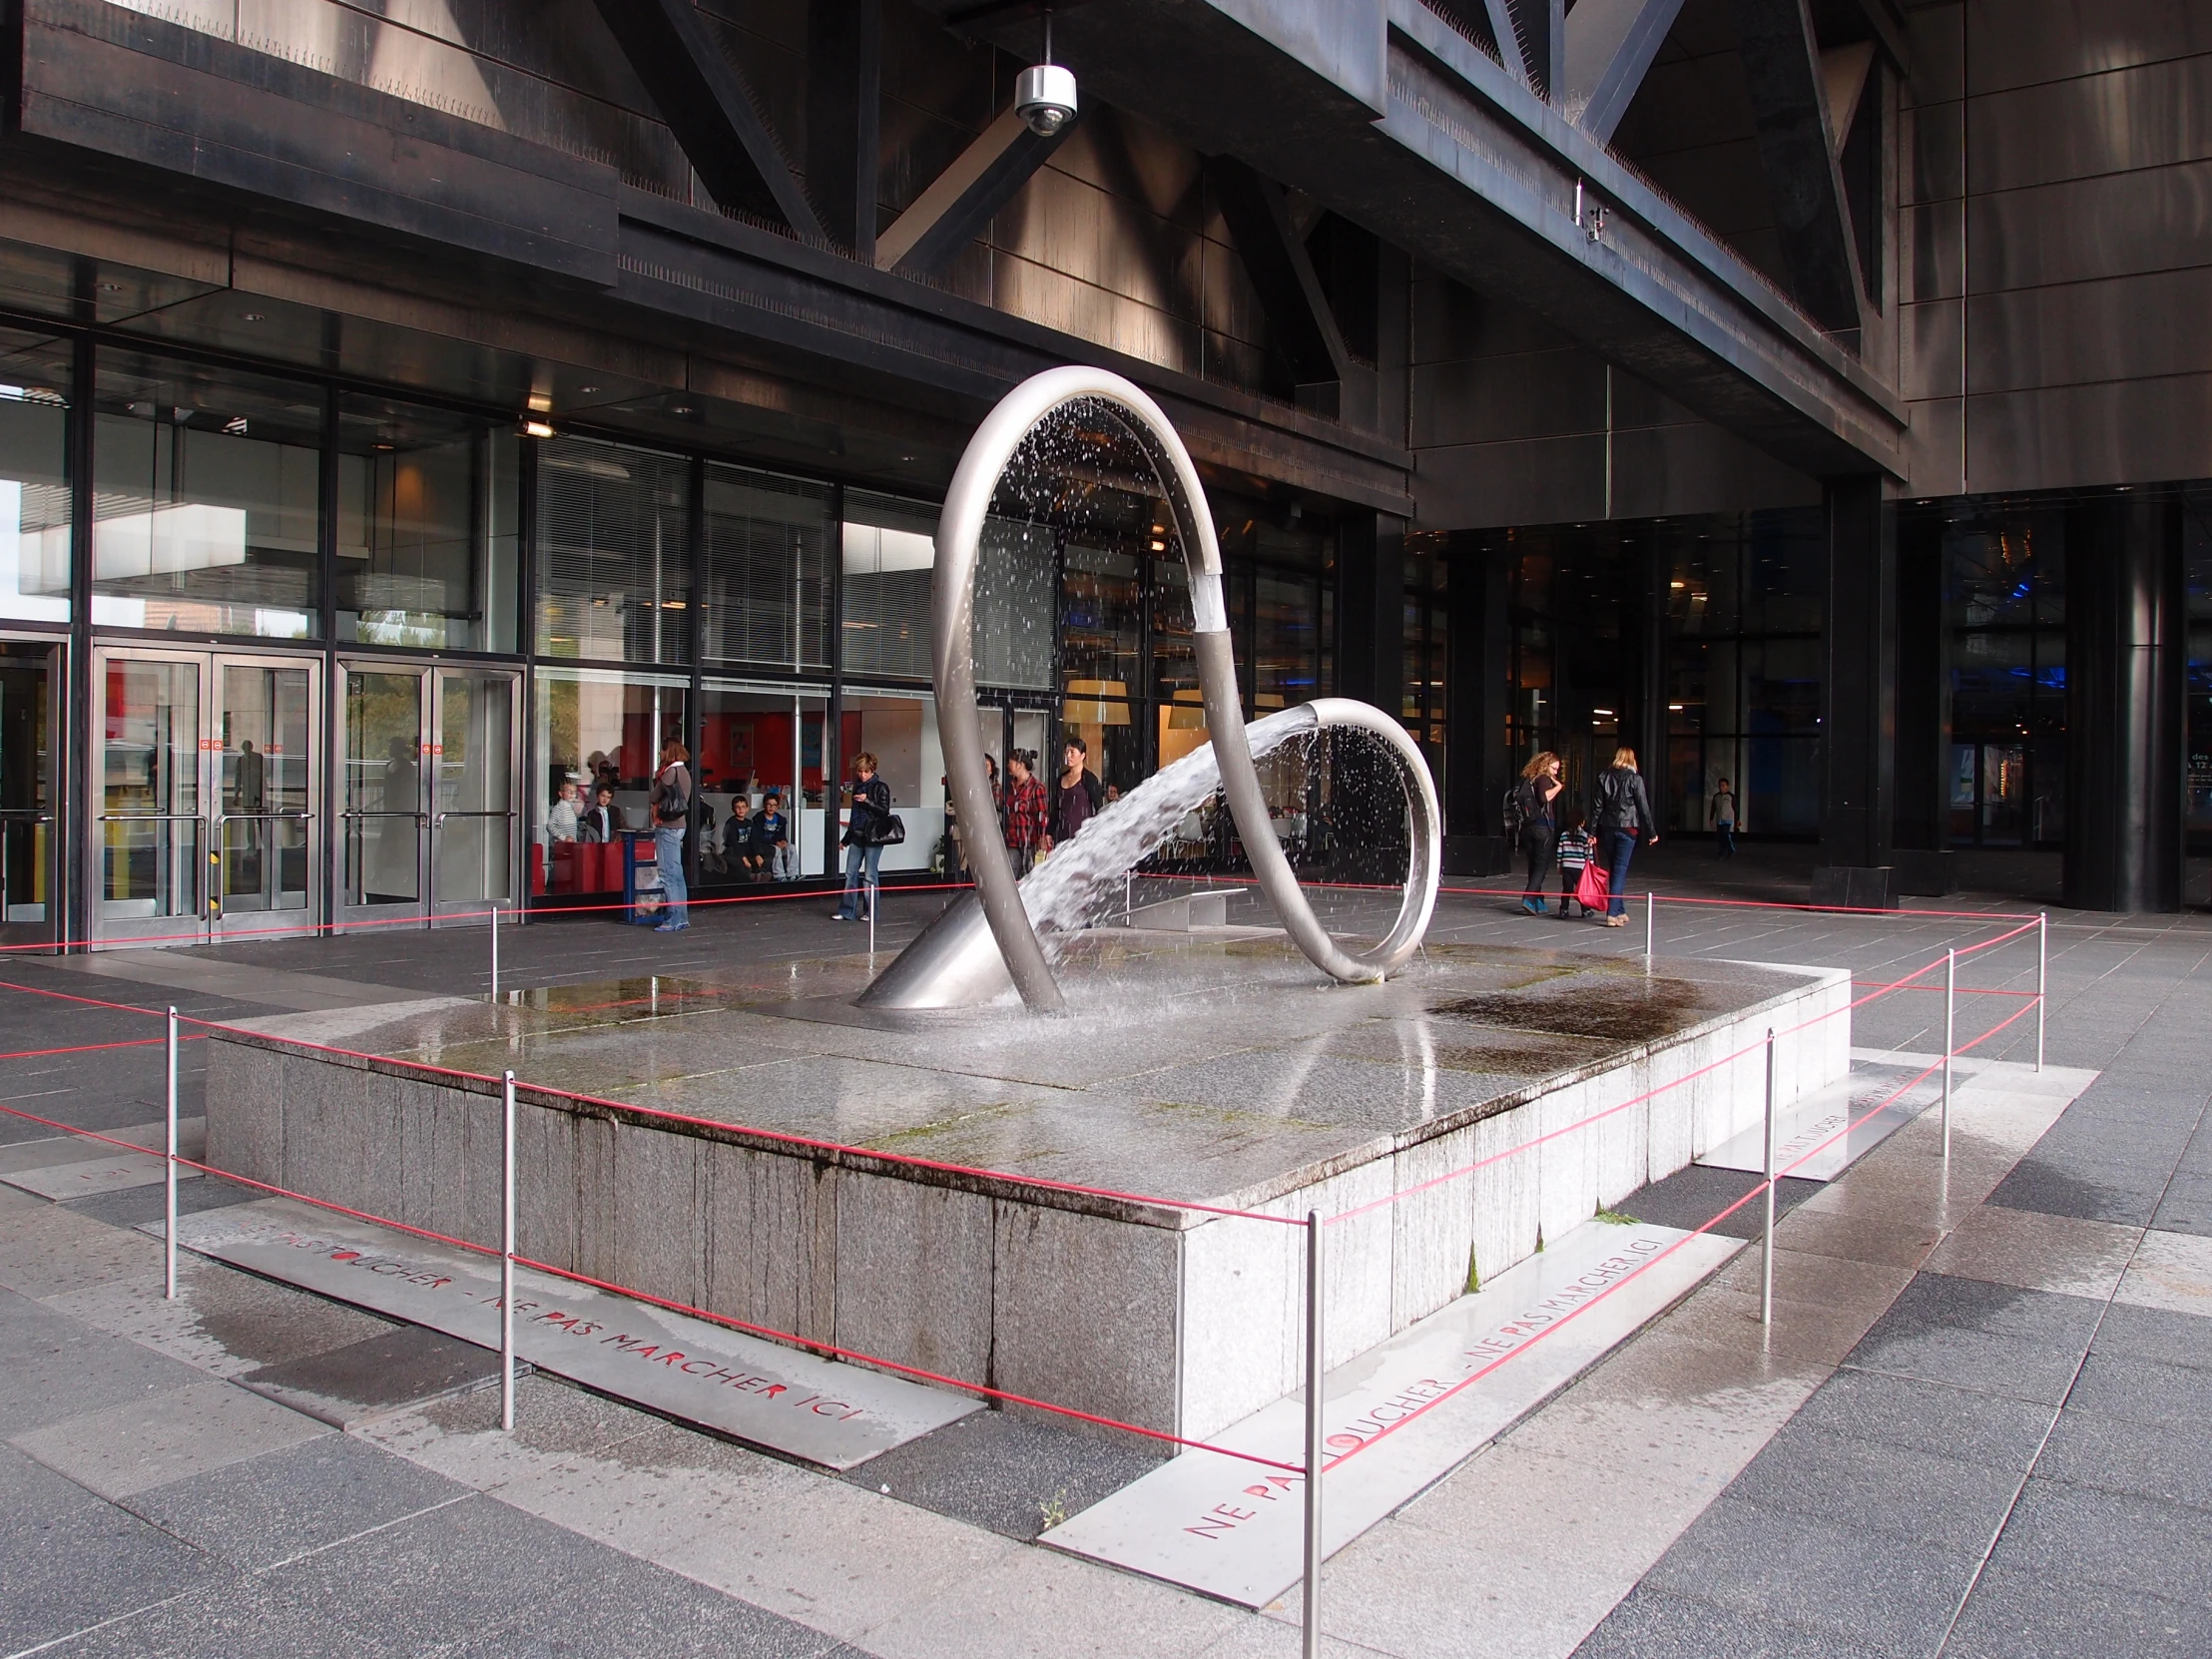 there is a sculpture of two shapes on a pedestal in front of the building